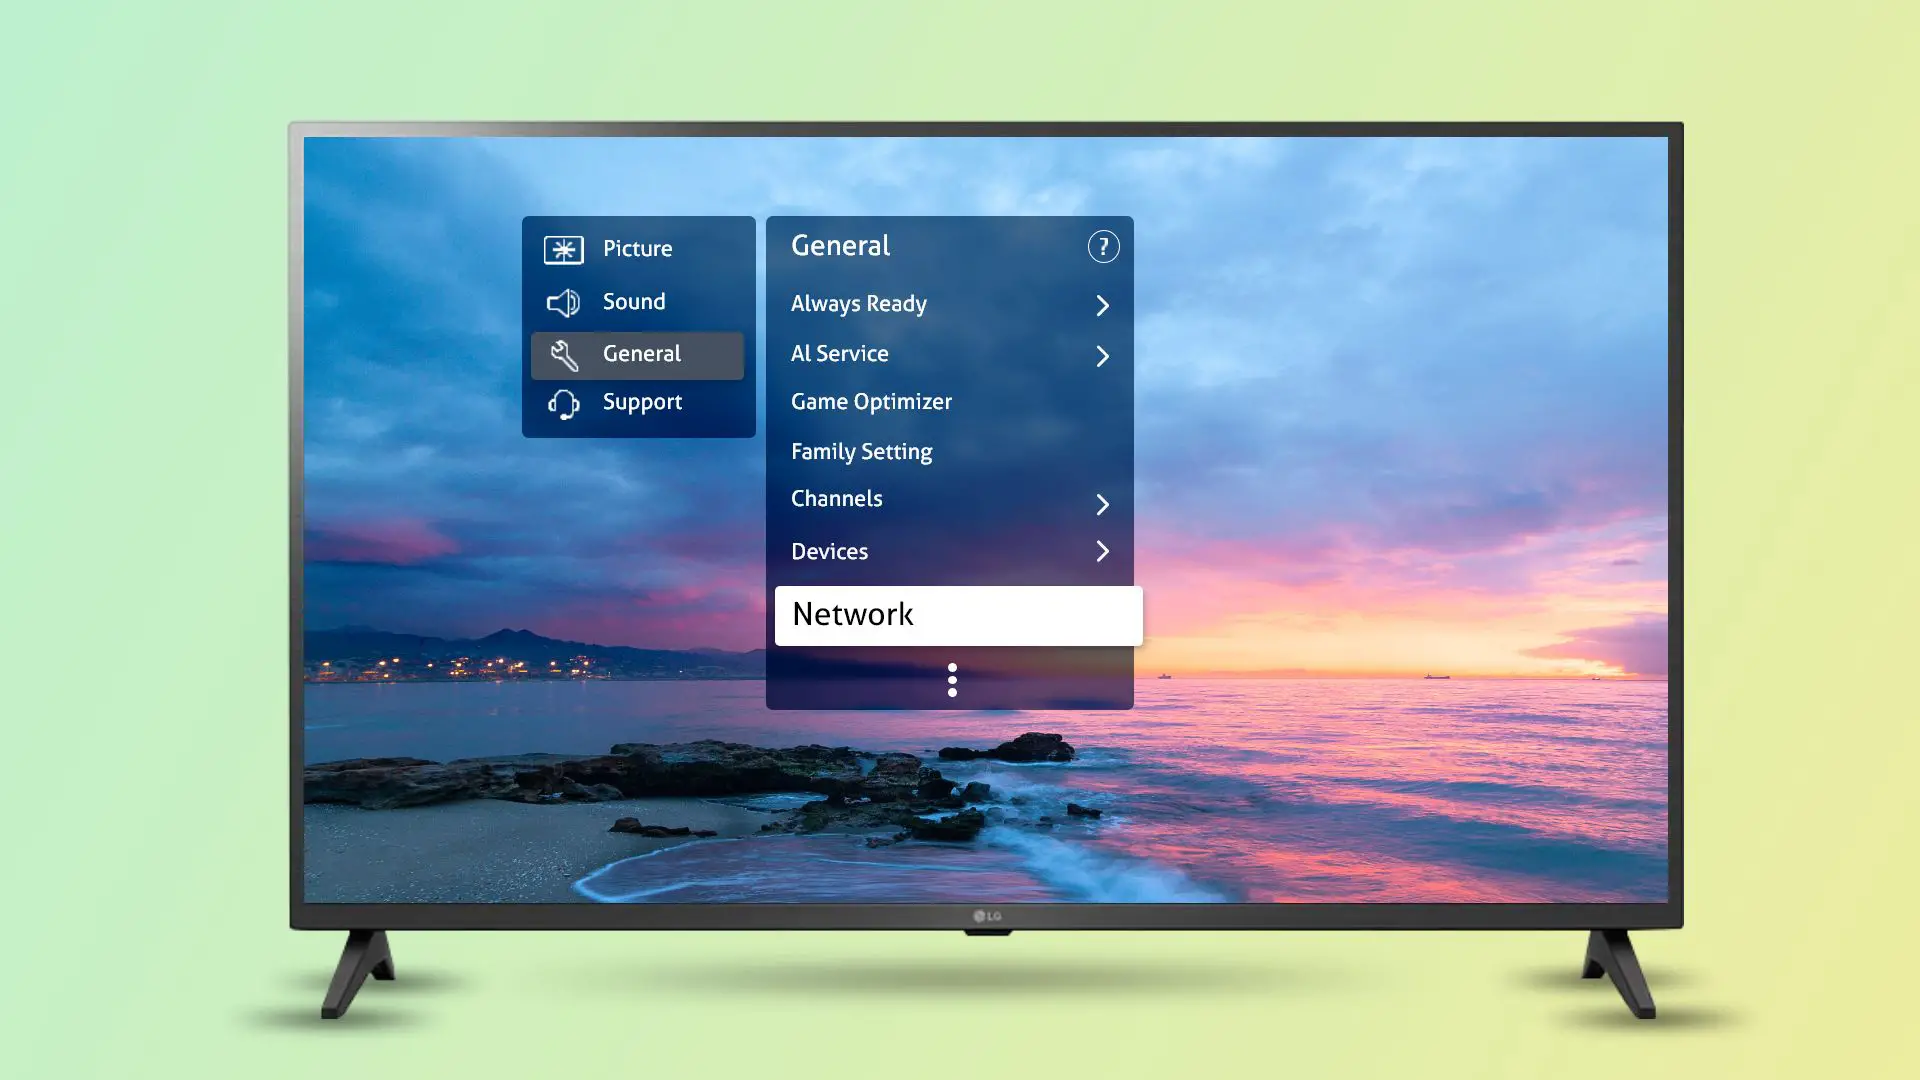 how to connect your LG TV to WiFi